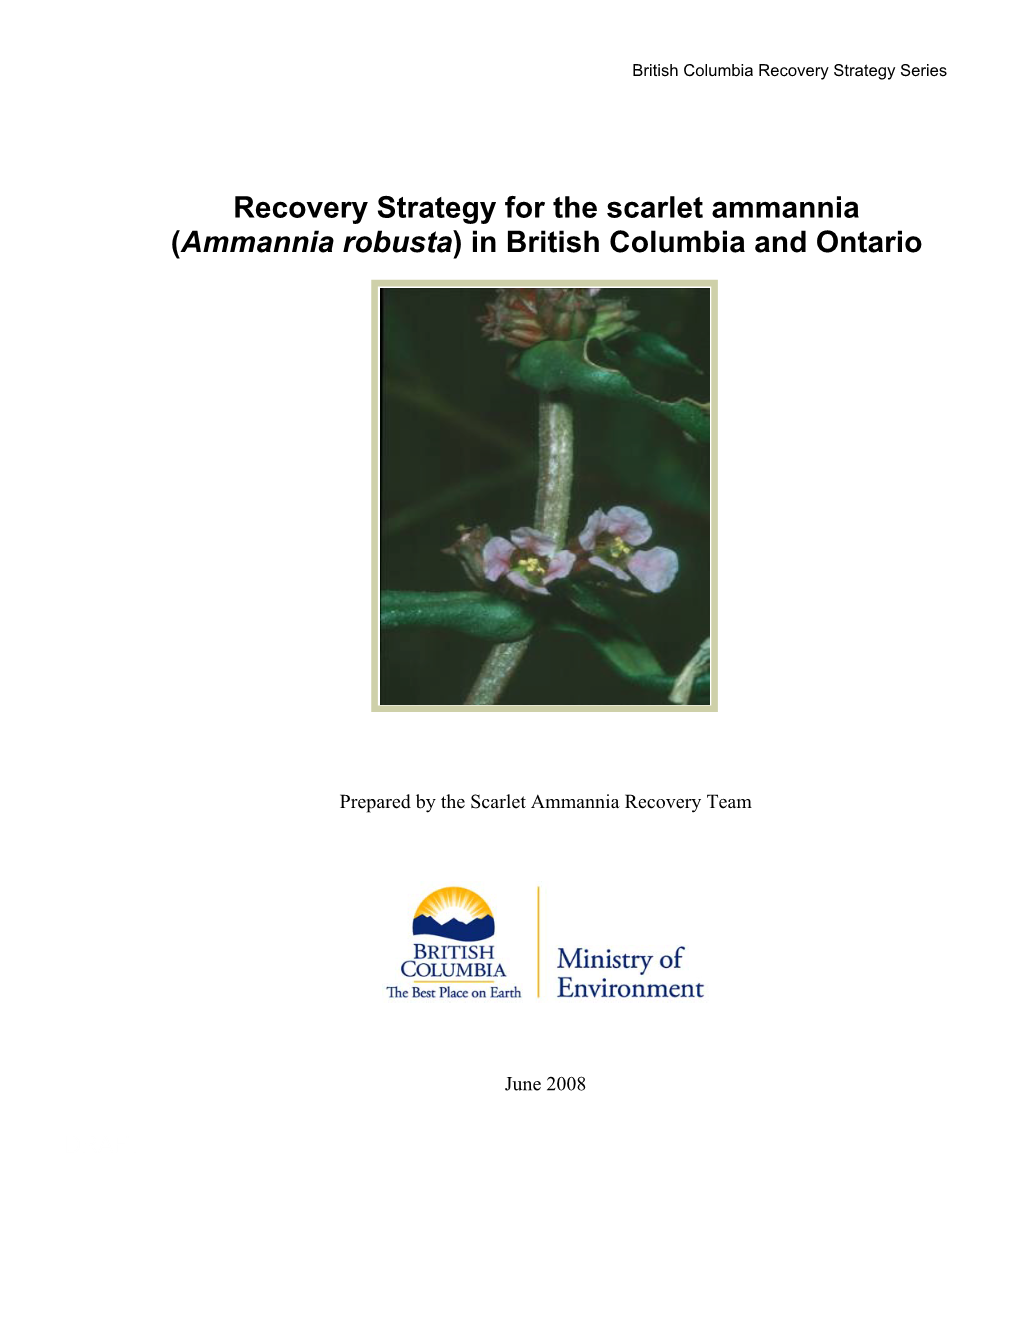 Recovery Strategy for the Scarlet Ammannia (Ammannia Robusta) in British Columbia and Ontario